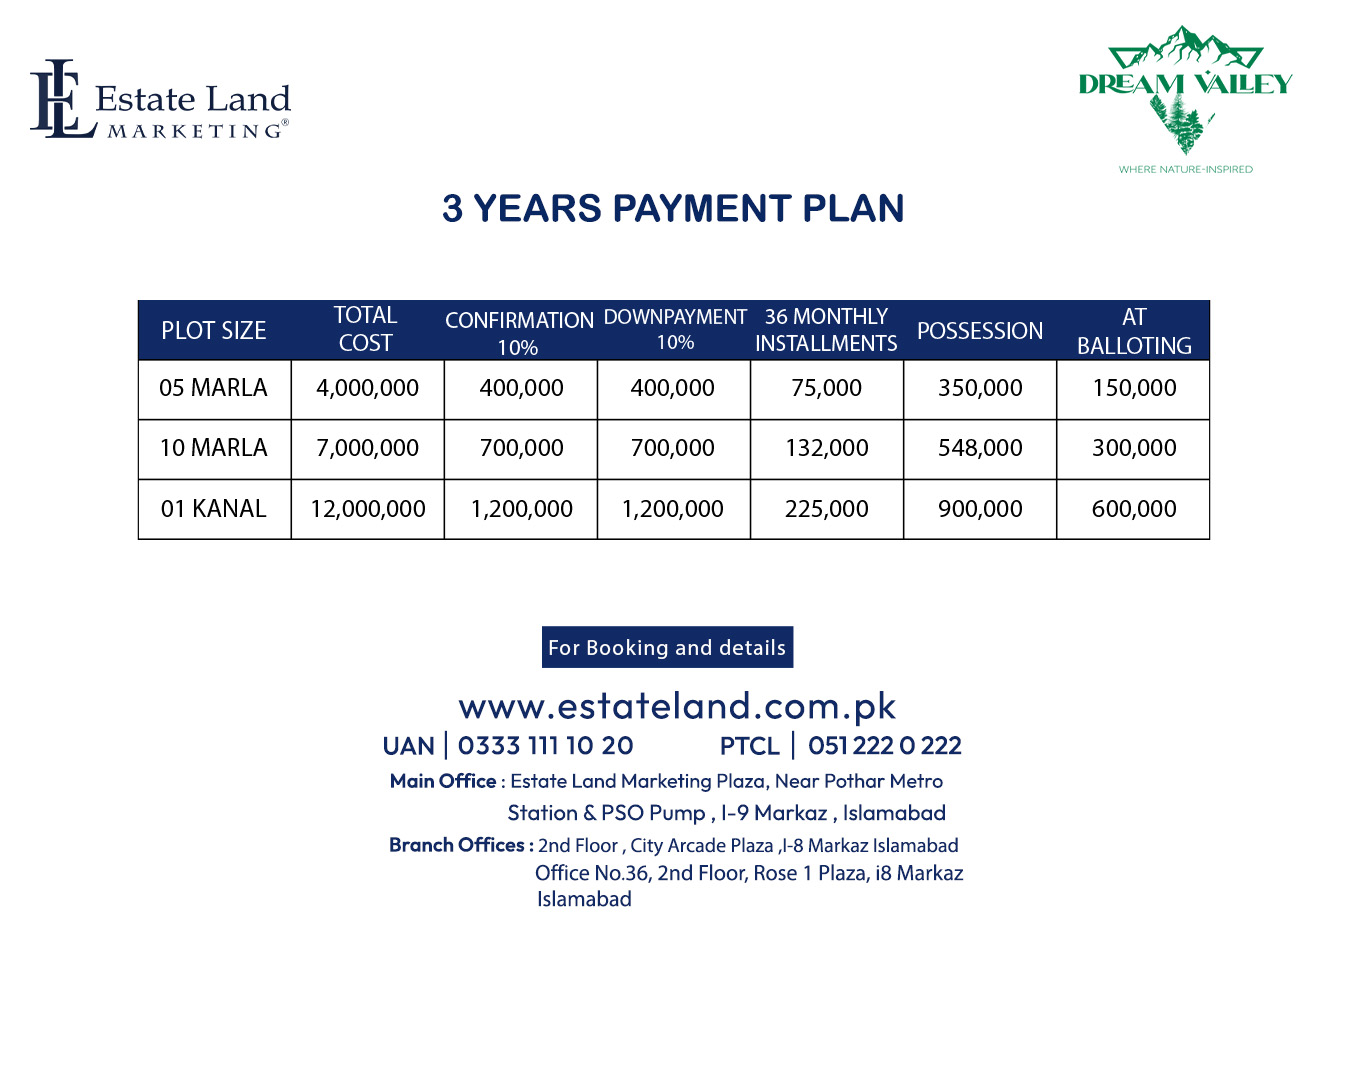 Dream Valley payment plan